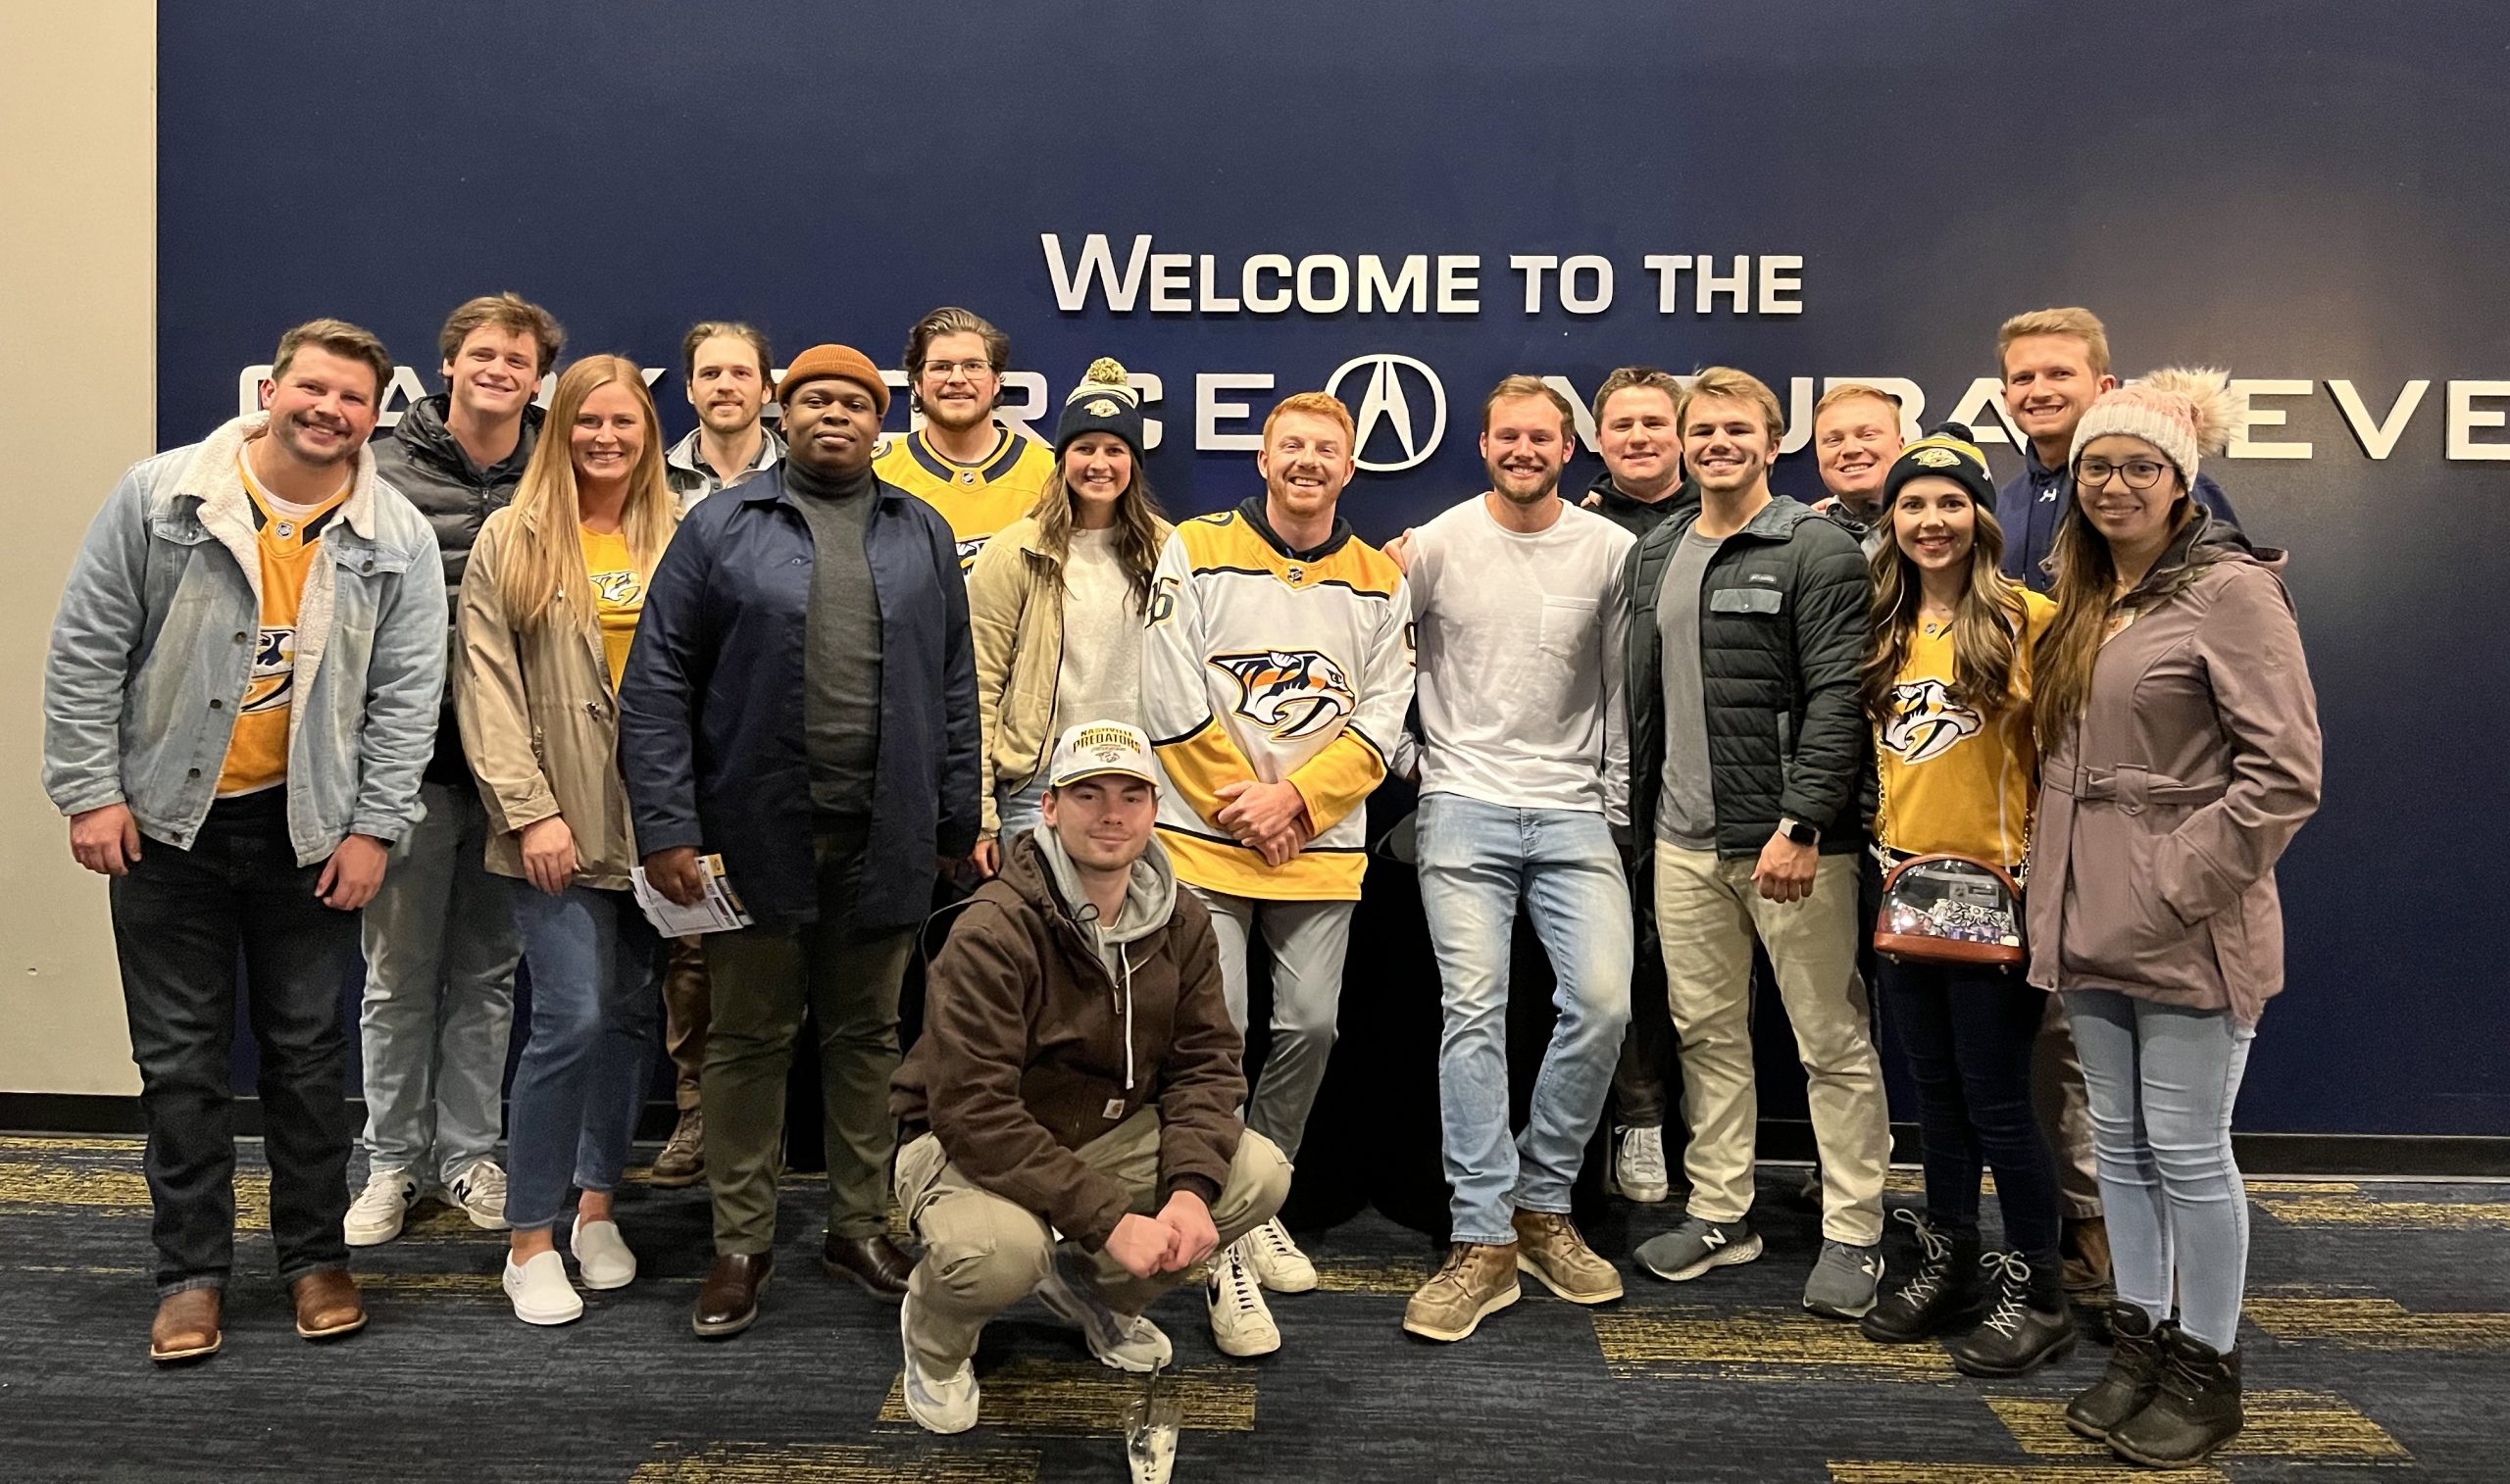 Messer Construction Company employees at a Predators game